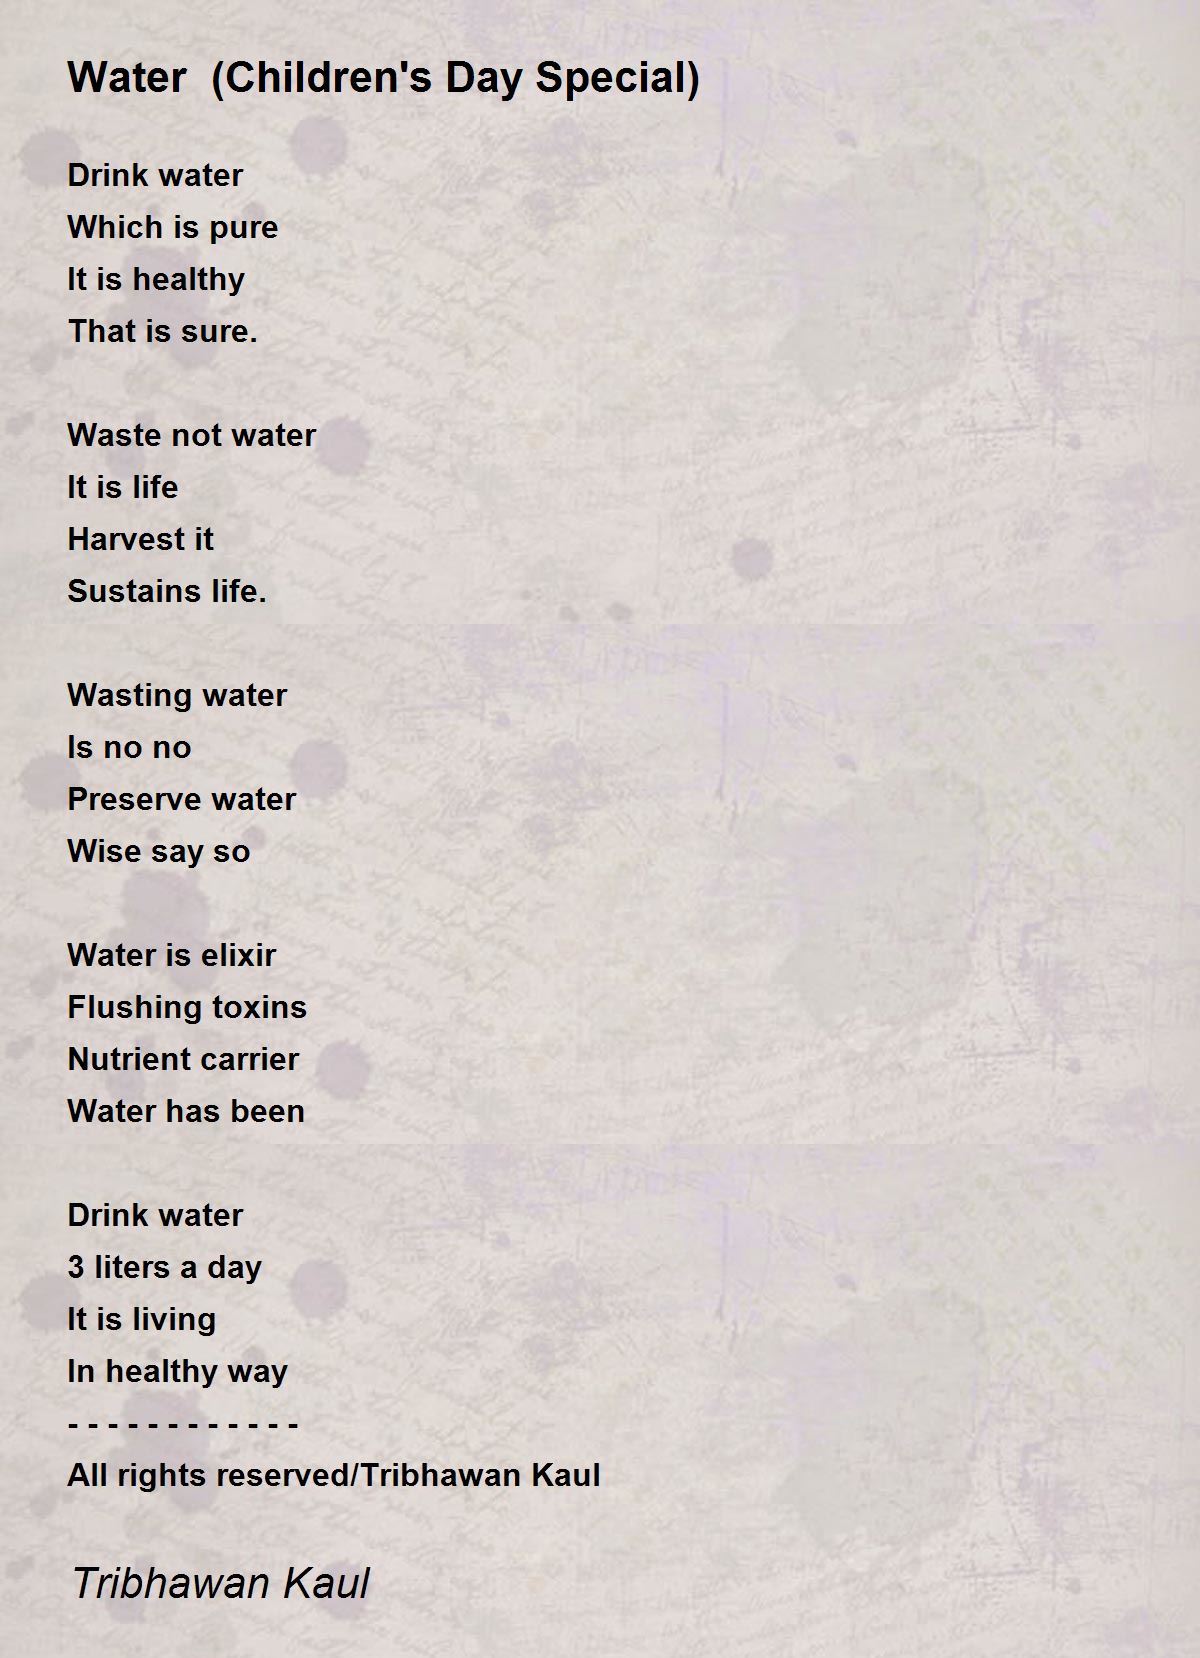 Water (Children's Day Special) Poem by Tribhawan Kaul 